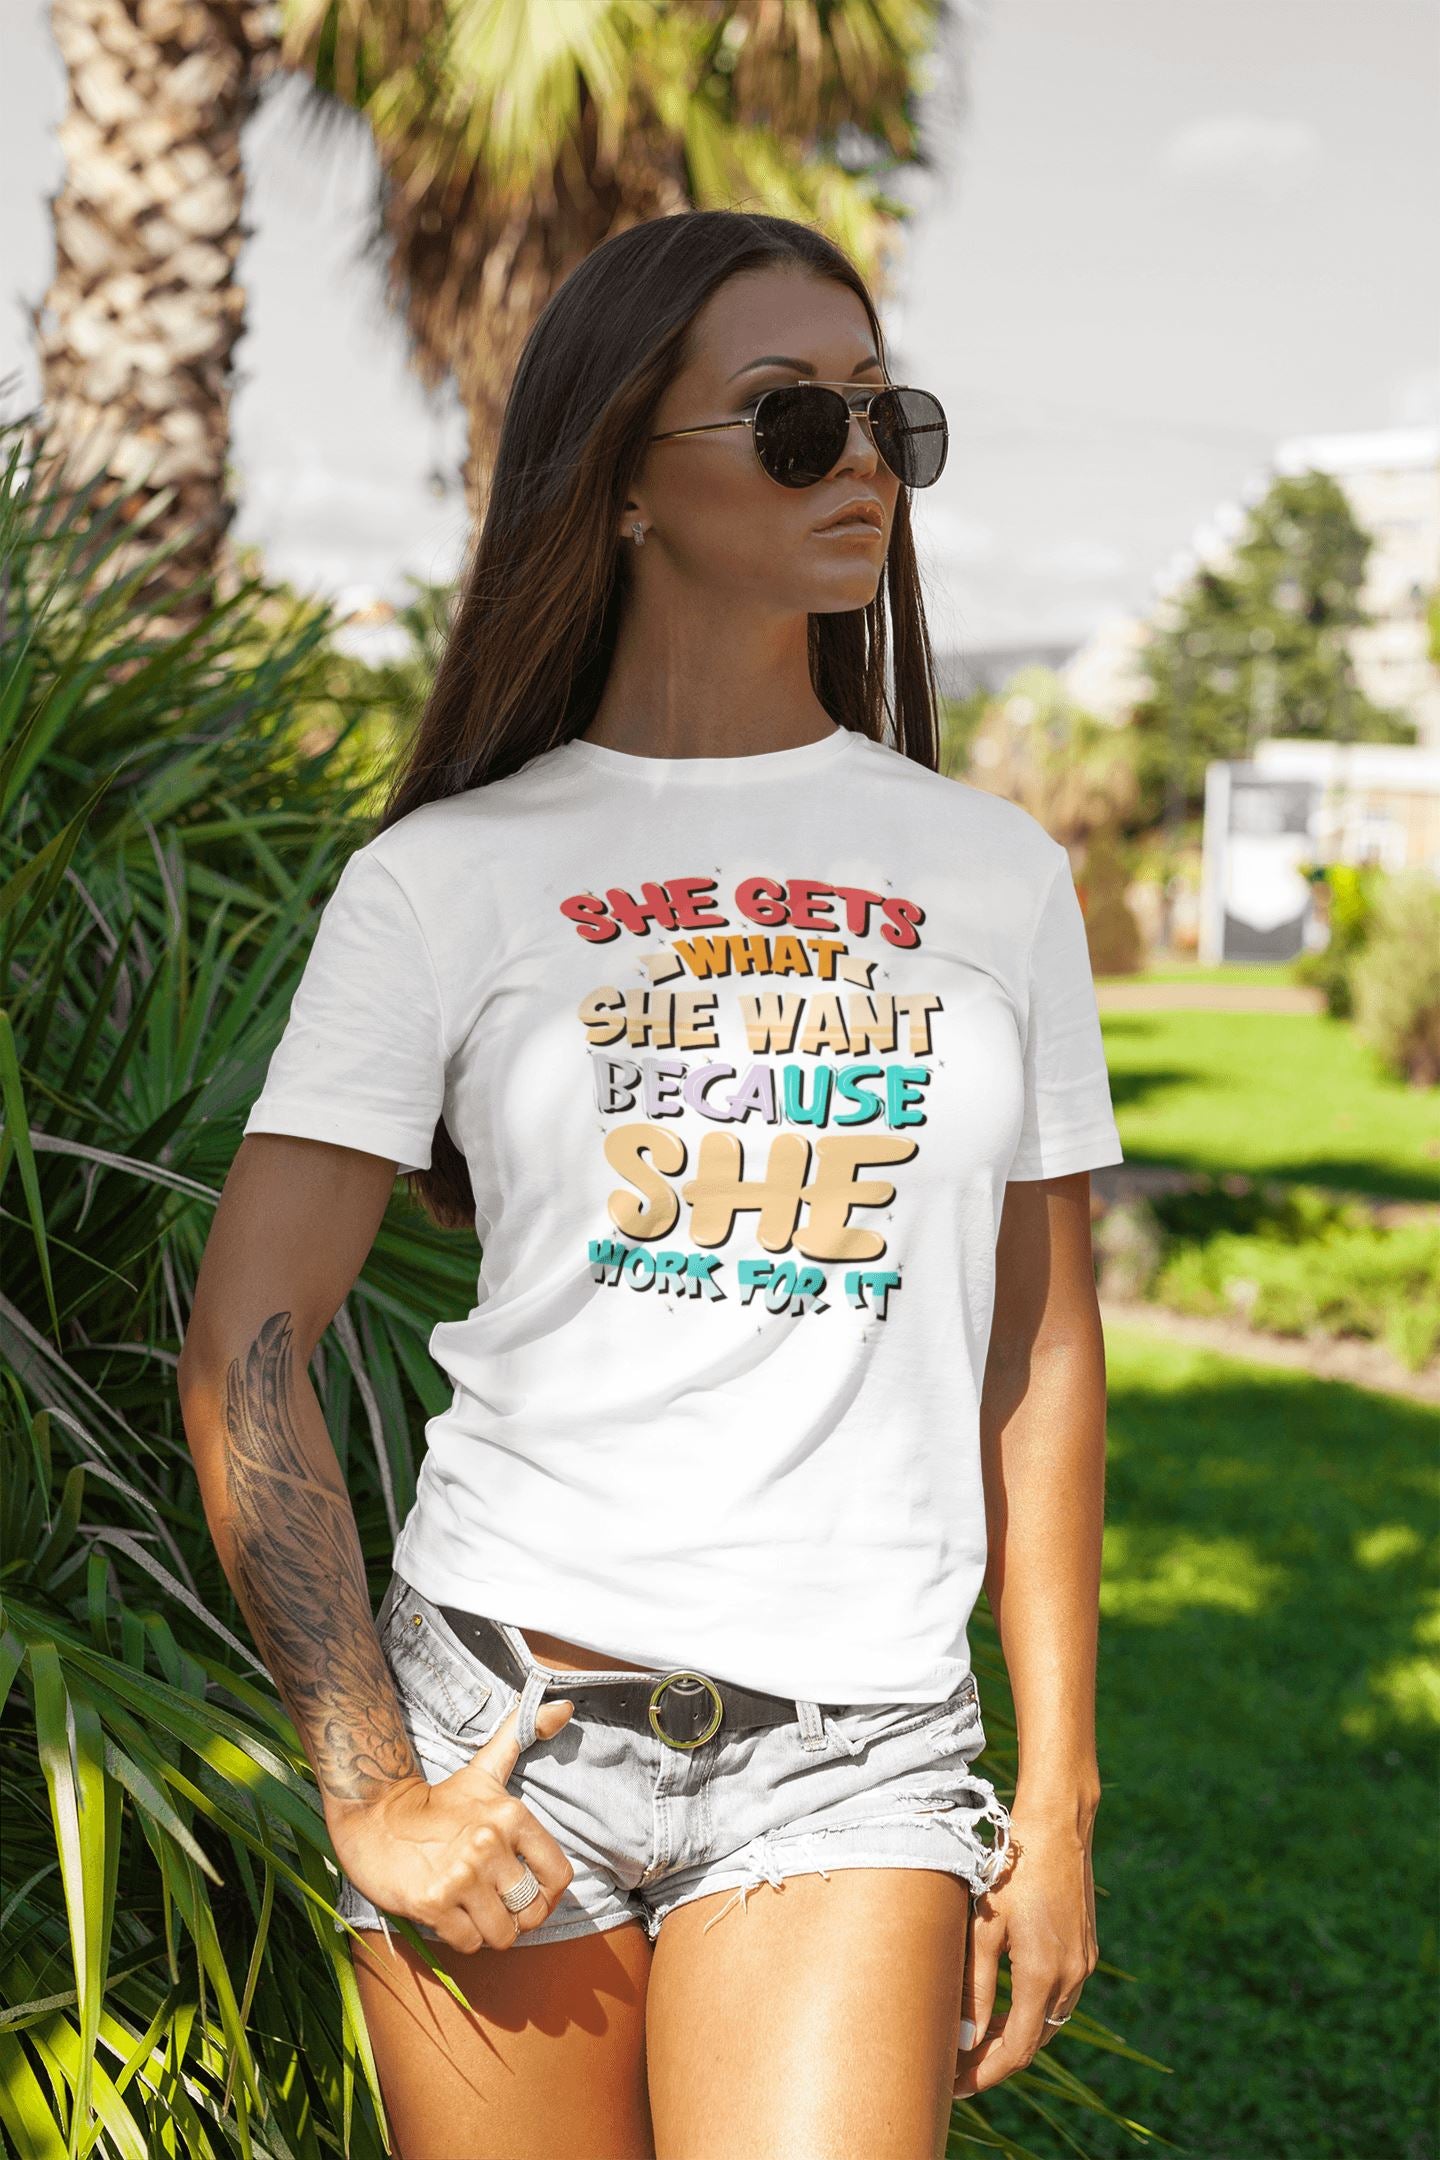 She Gets What She Wants Because She Works for It Special Long T Shirt for Women - Catch My Drift India  clothing, female, general, gym, made in india, motivation, shirt, t shirt, tshirt, whit